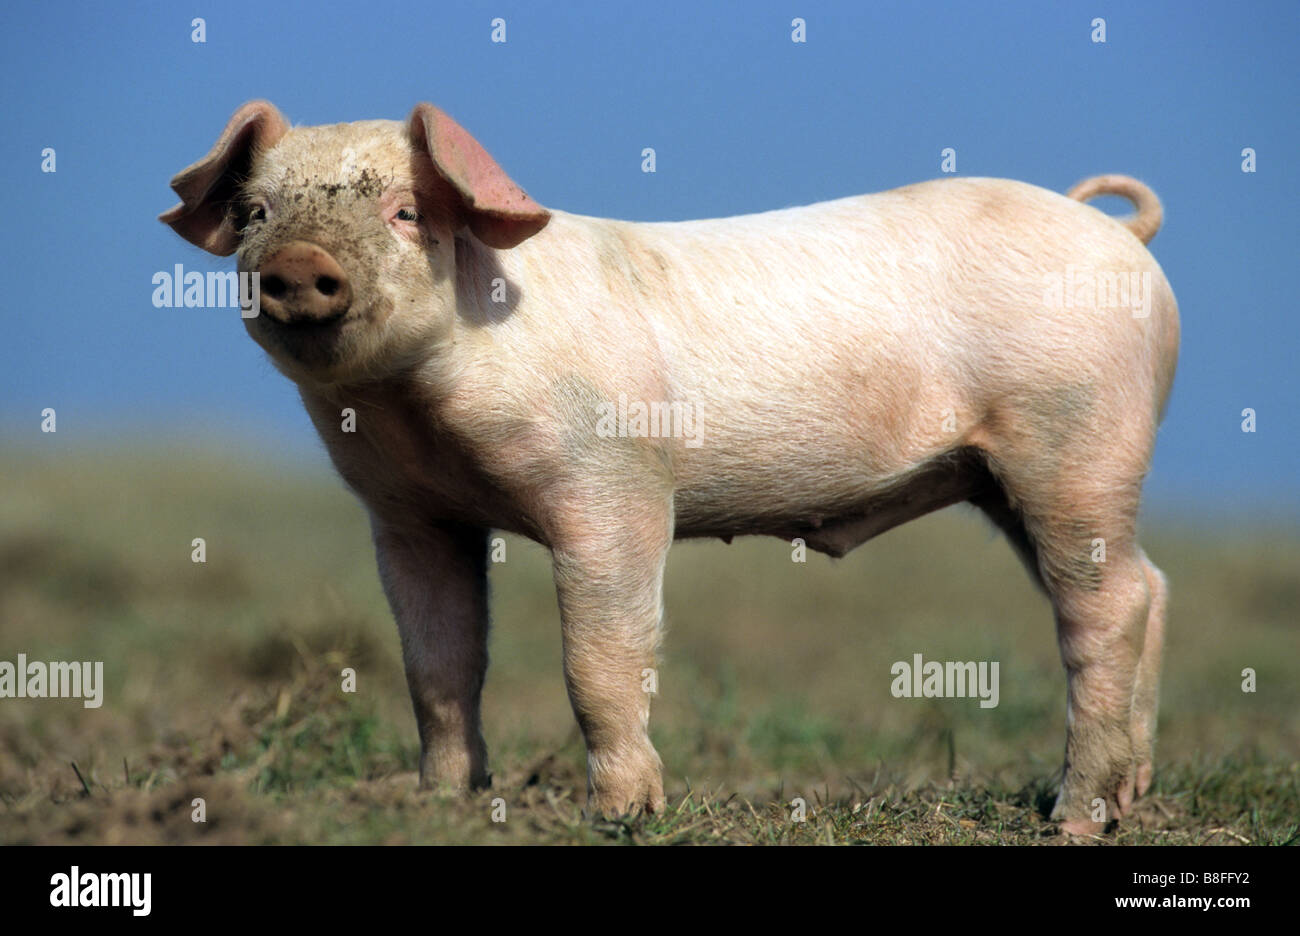 Domestic Pig (Sus scrofa domestica). Piglet standing on grass Stock Photo